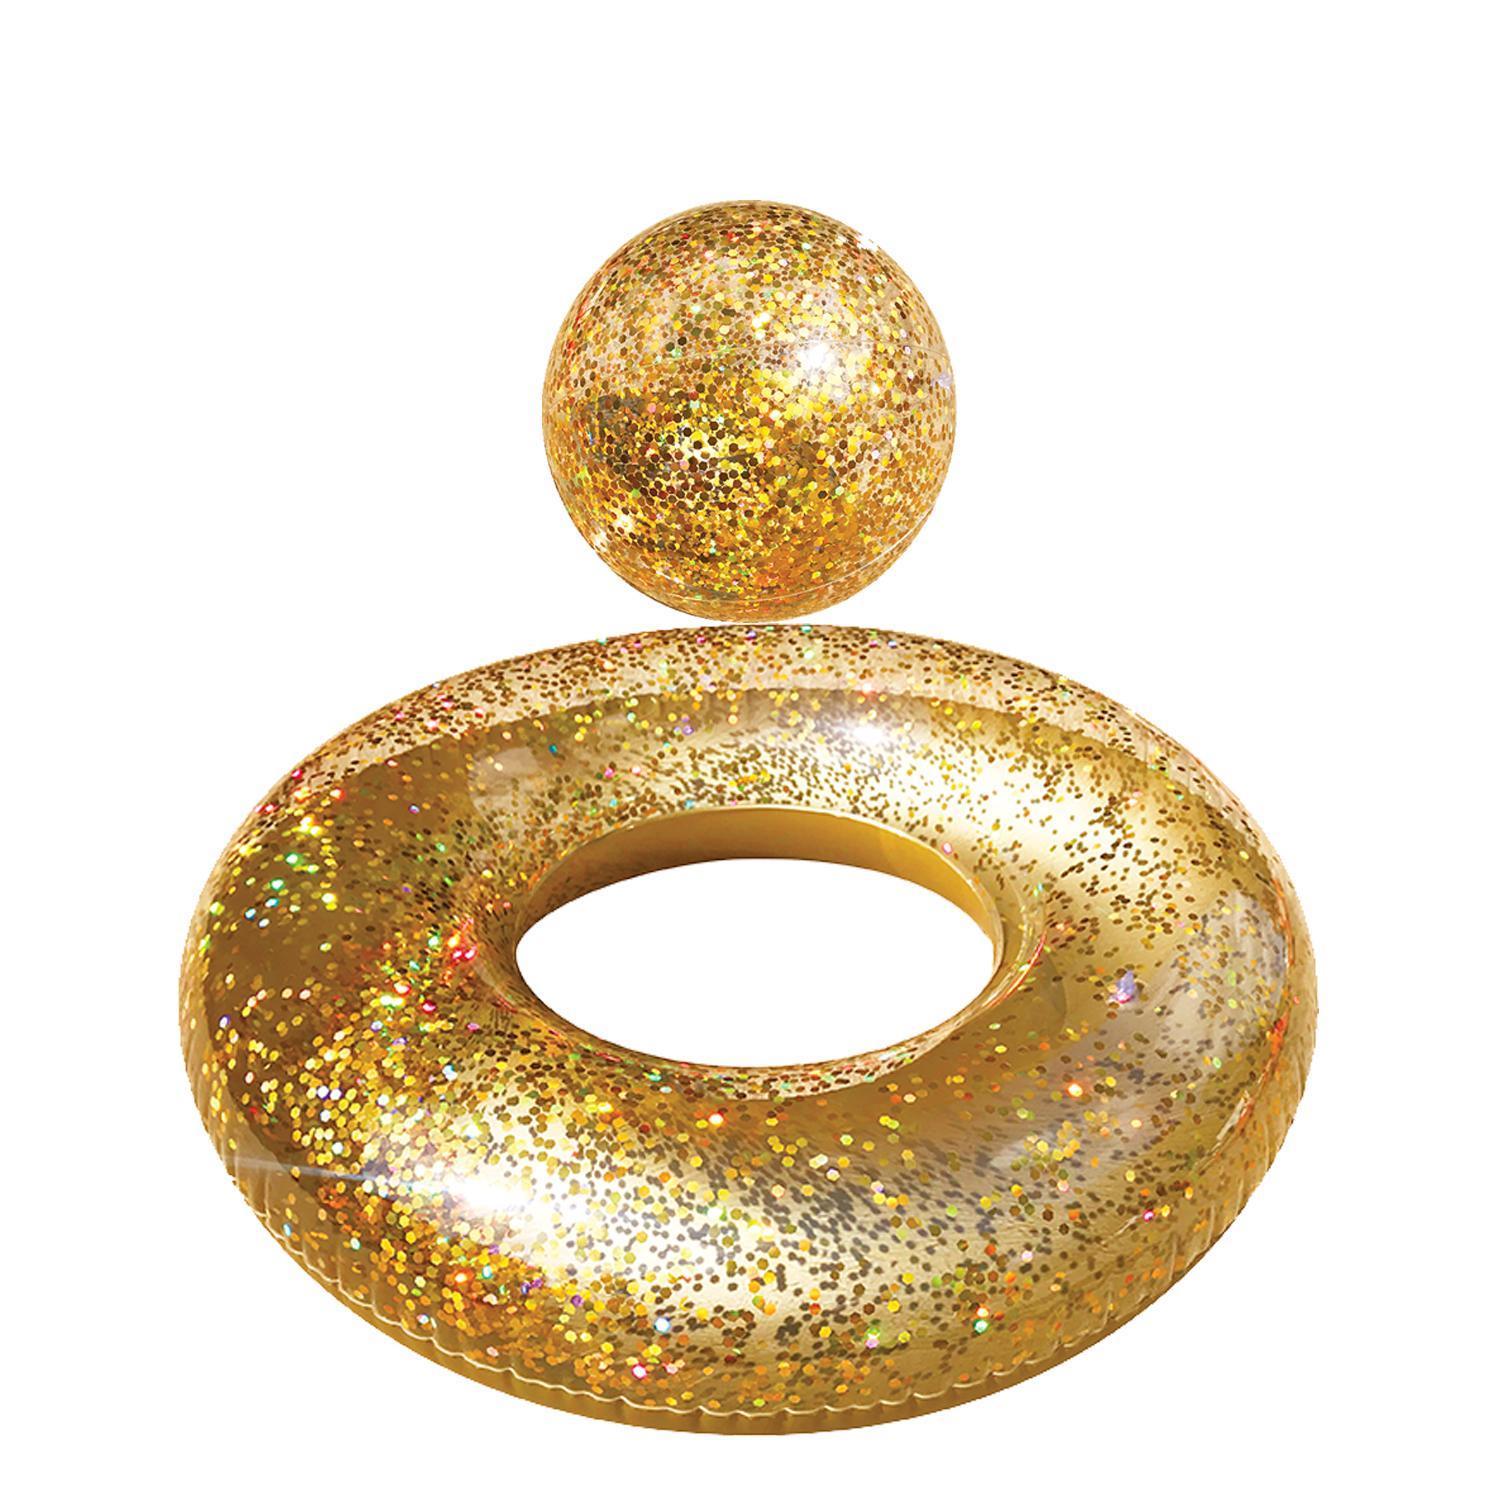 NEW PALM BEACH BLING SWIM RING & BEACH BALL SET INFLATABLE POOL TOY [Colour: Colour : Gold]